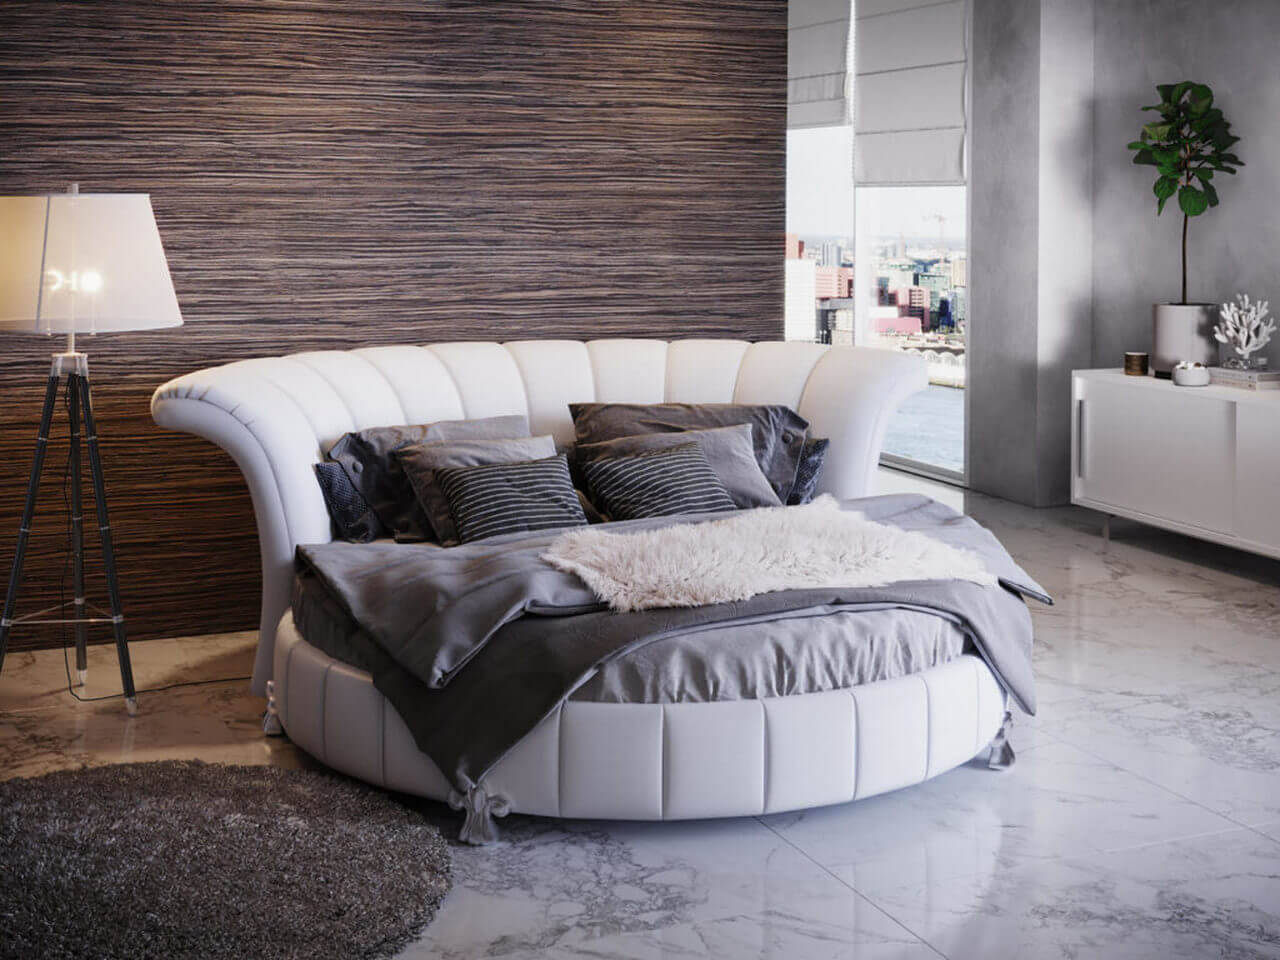 Modern Round Bed Design for Your Bedroom